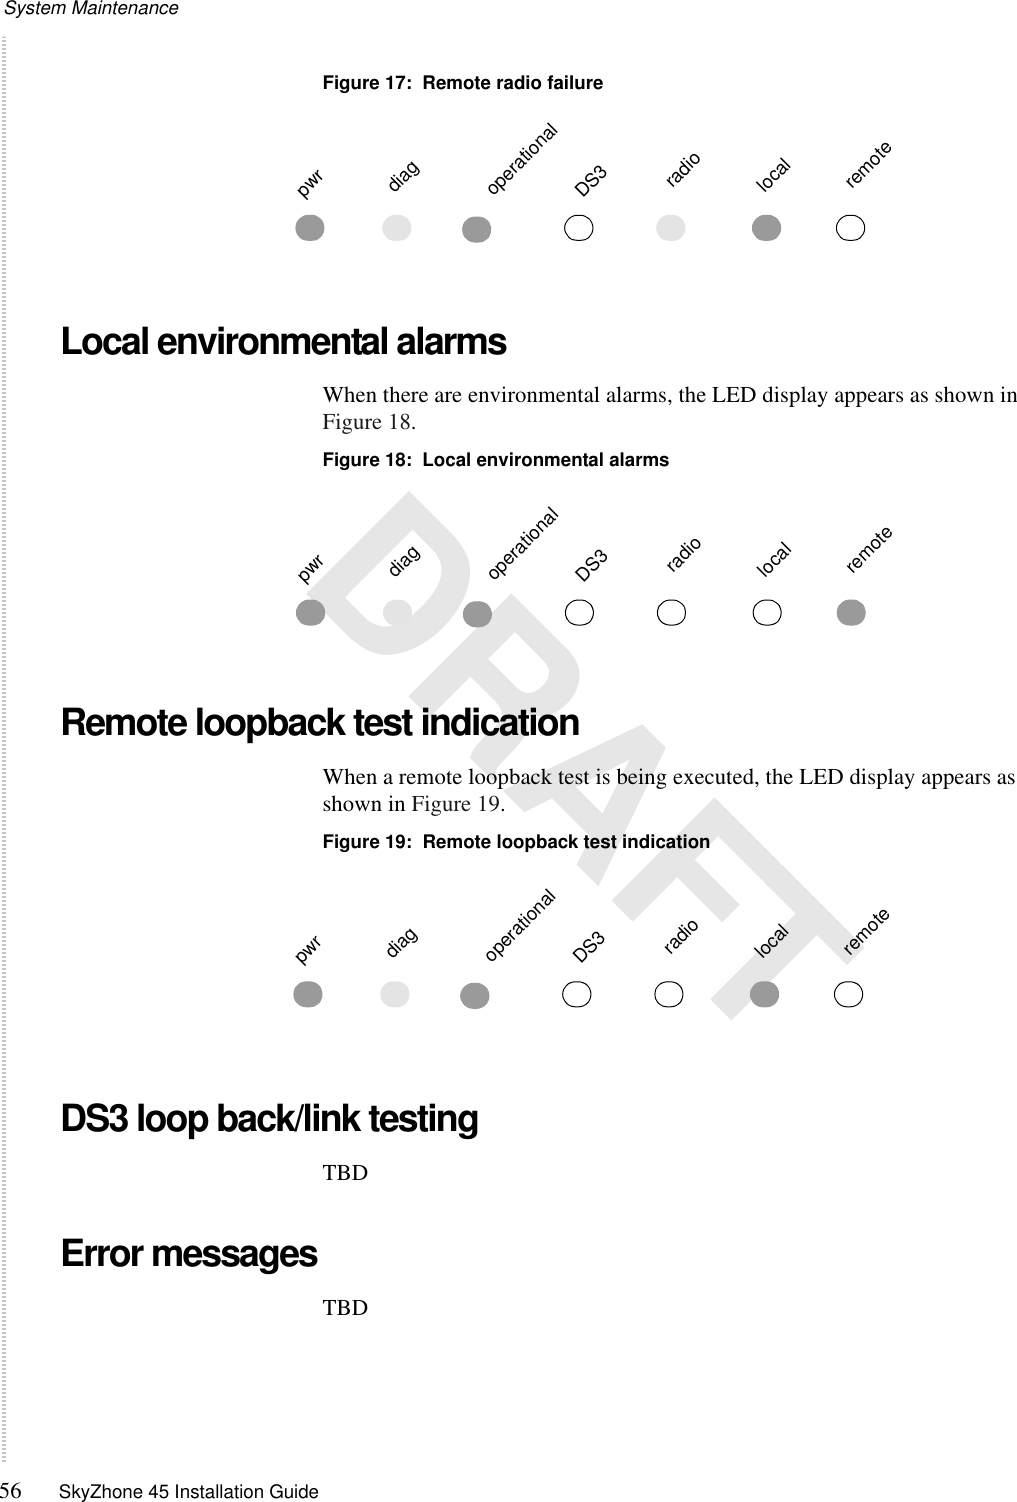 System Maintenance56 SkyZhone 45 Installation Guide DRAFTFigure 17:  Remote radio failureLocal environmental alarmsWhen there are environmental alarms, the LED display appears as shown in Figure 18.Figure 18:  Local environmental alarmsRemote loopback test indicationWhen a remote loopback test is being executed, the LED display appears as shown in Figure 19.Figure 19:  Remote loopback test indicationDS3 loop back/link testingTBDError messagesTBDpwrdiagoperational DS3radiolocalremotepwrdiagoperational DS3radiolocalremotepwrdiagoperational DS3radiolocalremote